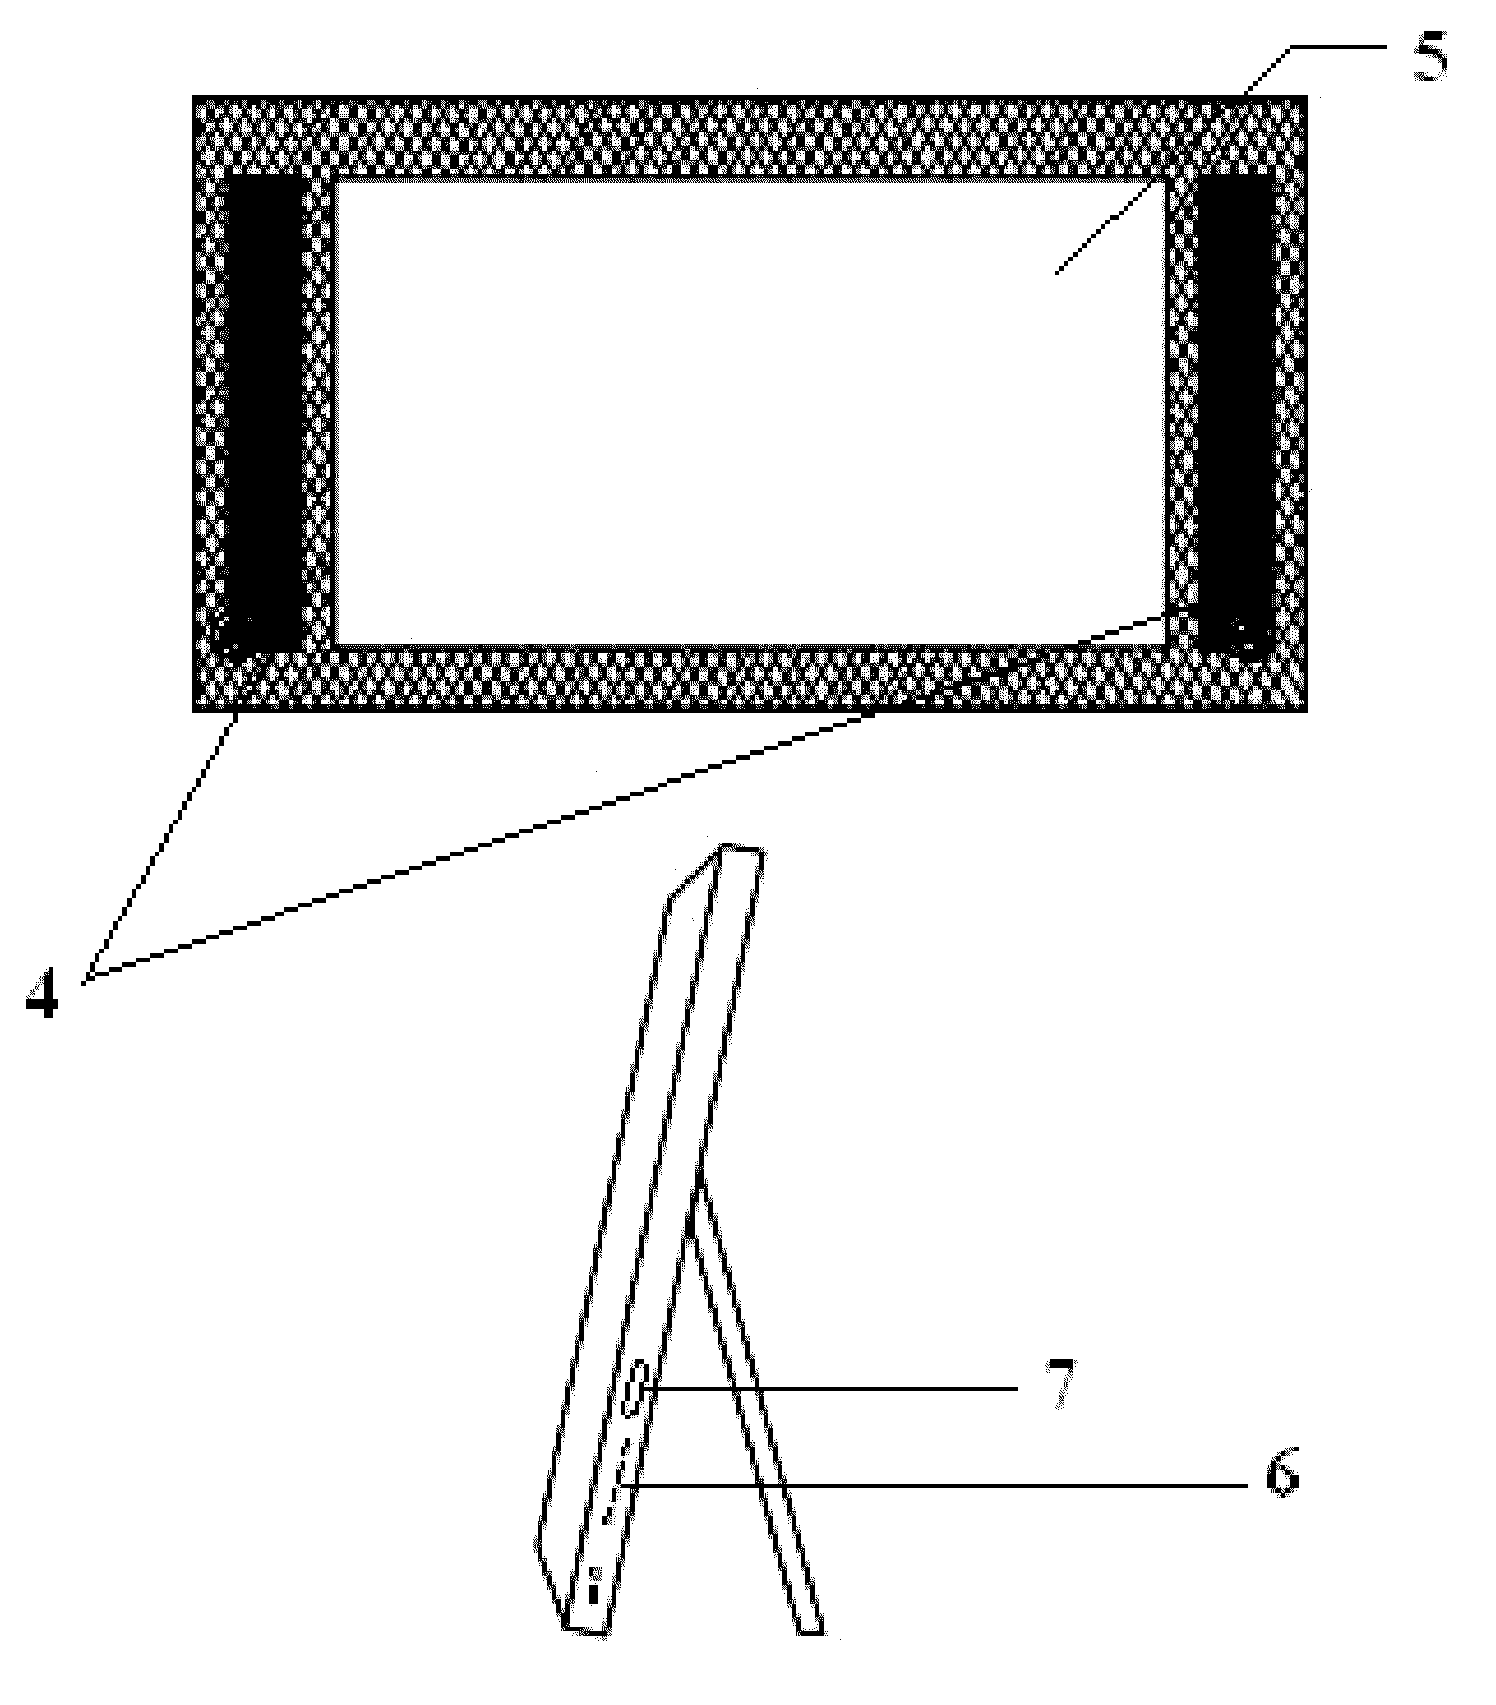 Multi-Input-Driven Entertainment and Communication Console With Minimum User Mobility